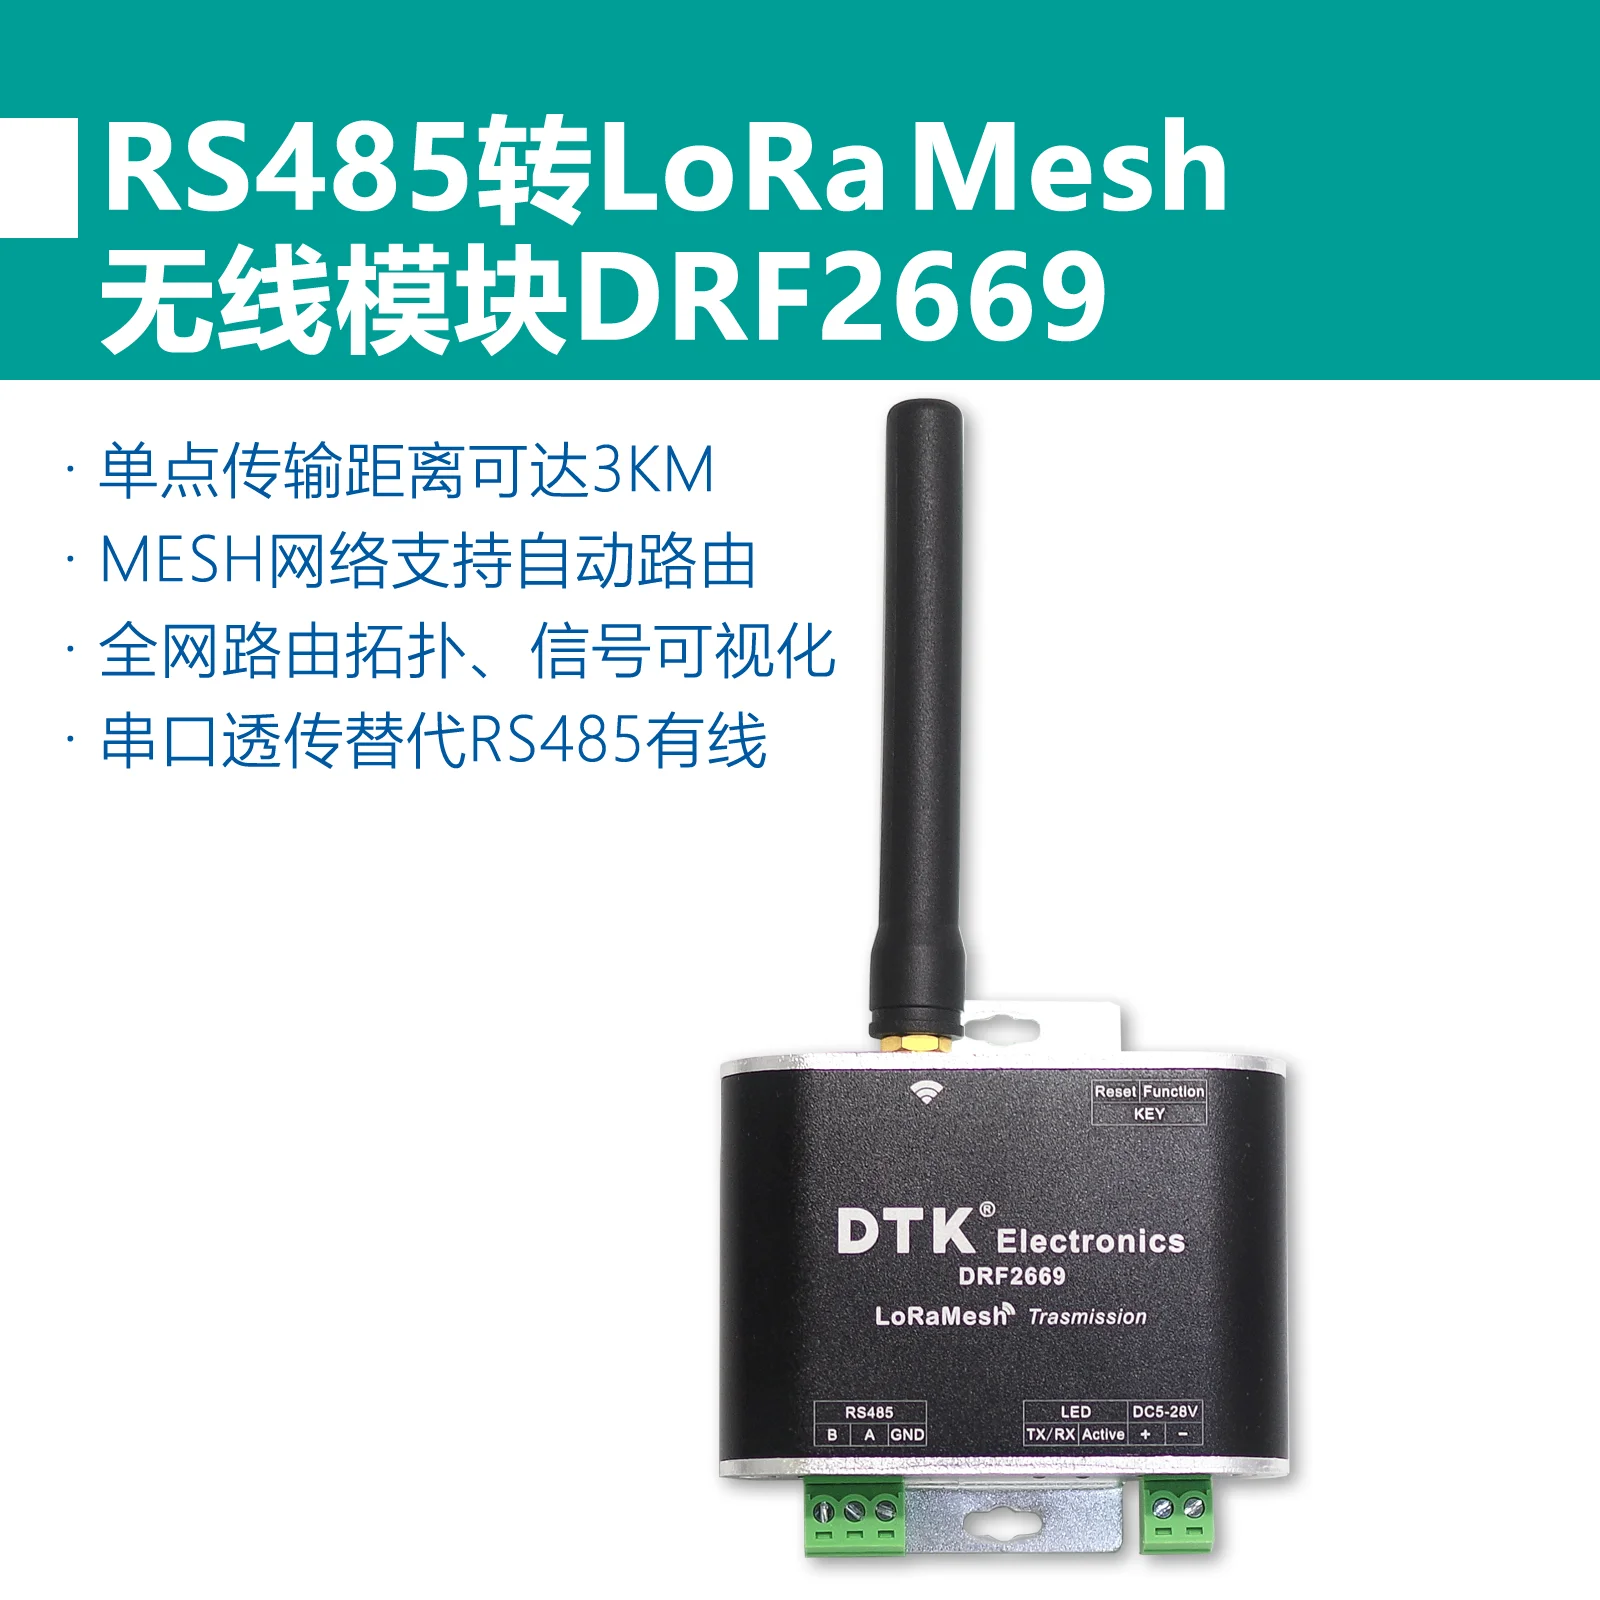 

RS485 to LORA wireless module, MESH network automatic relay SX1262, spread spectrum 3km transmission, DRF2669